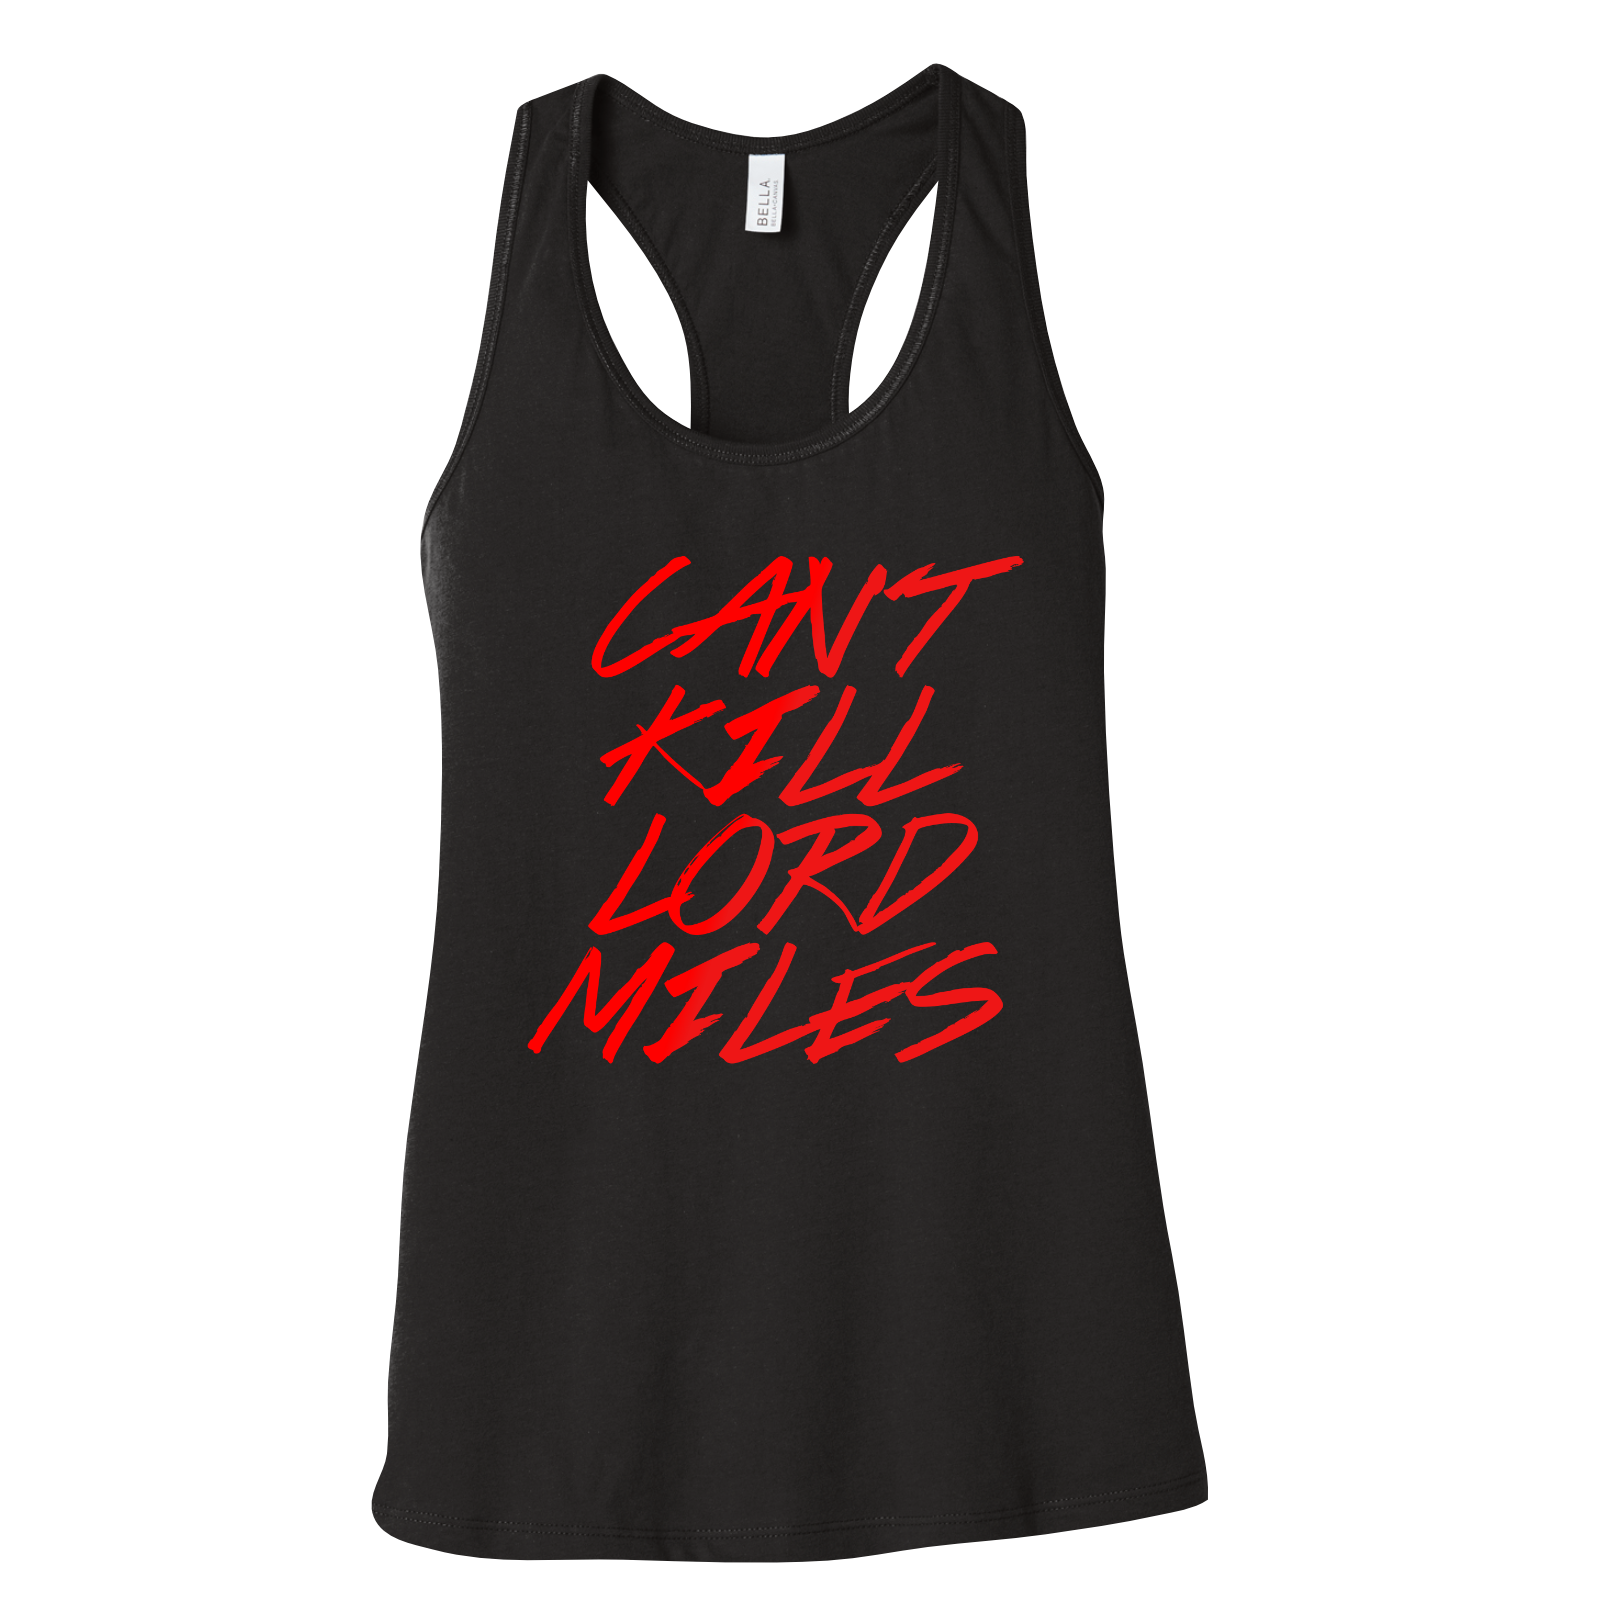 Cant Kill Lord Miles (Red) T-Shirt